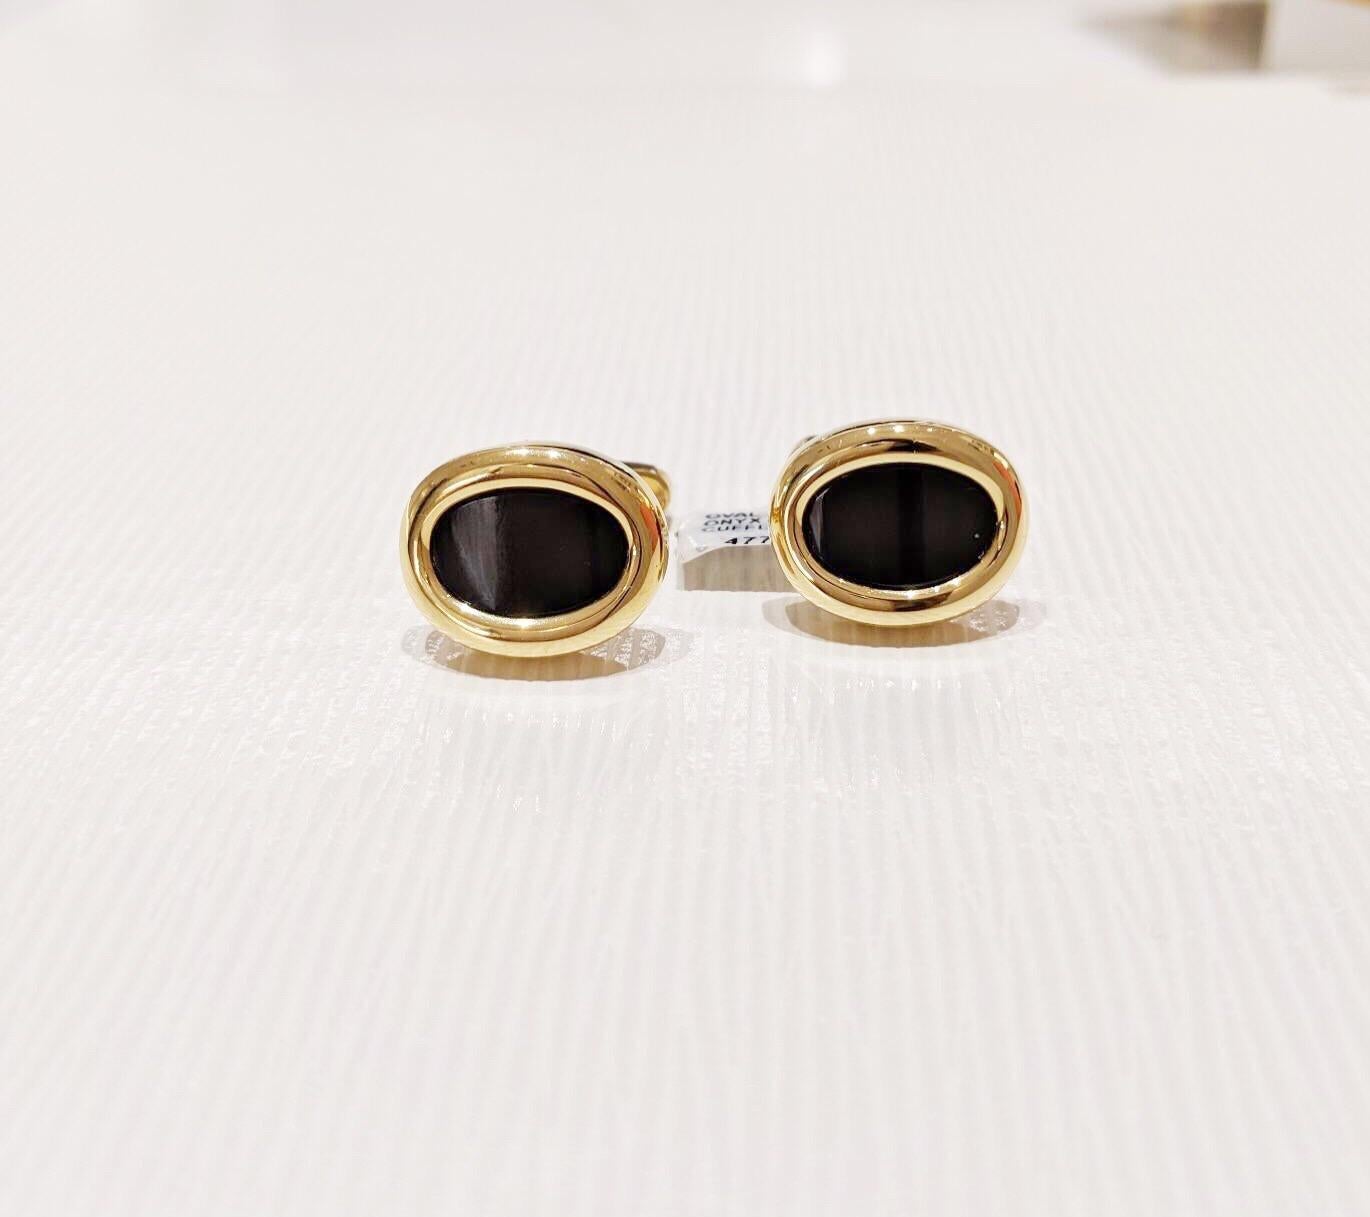 George Gero 18 Karat Yellow Gold Black Onyx Oval Cuffinks In New Condition For Sale In New York, NY